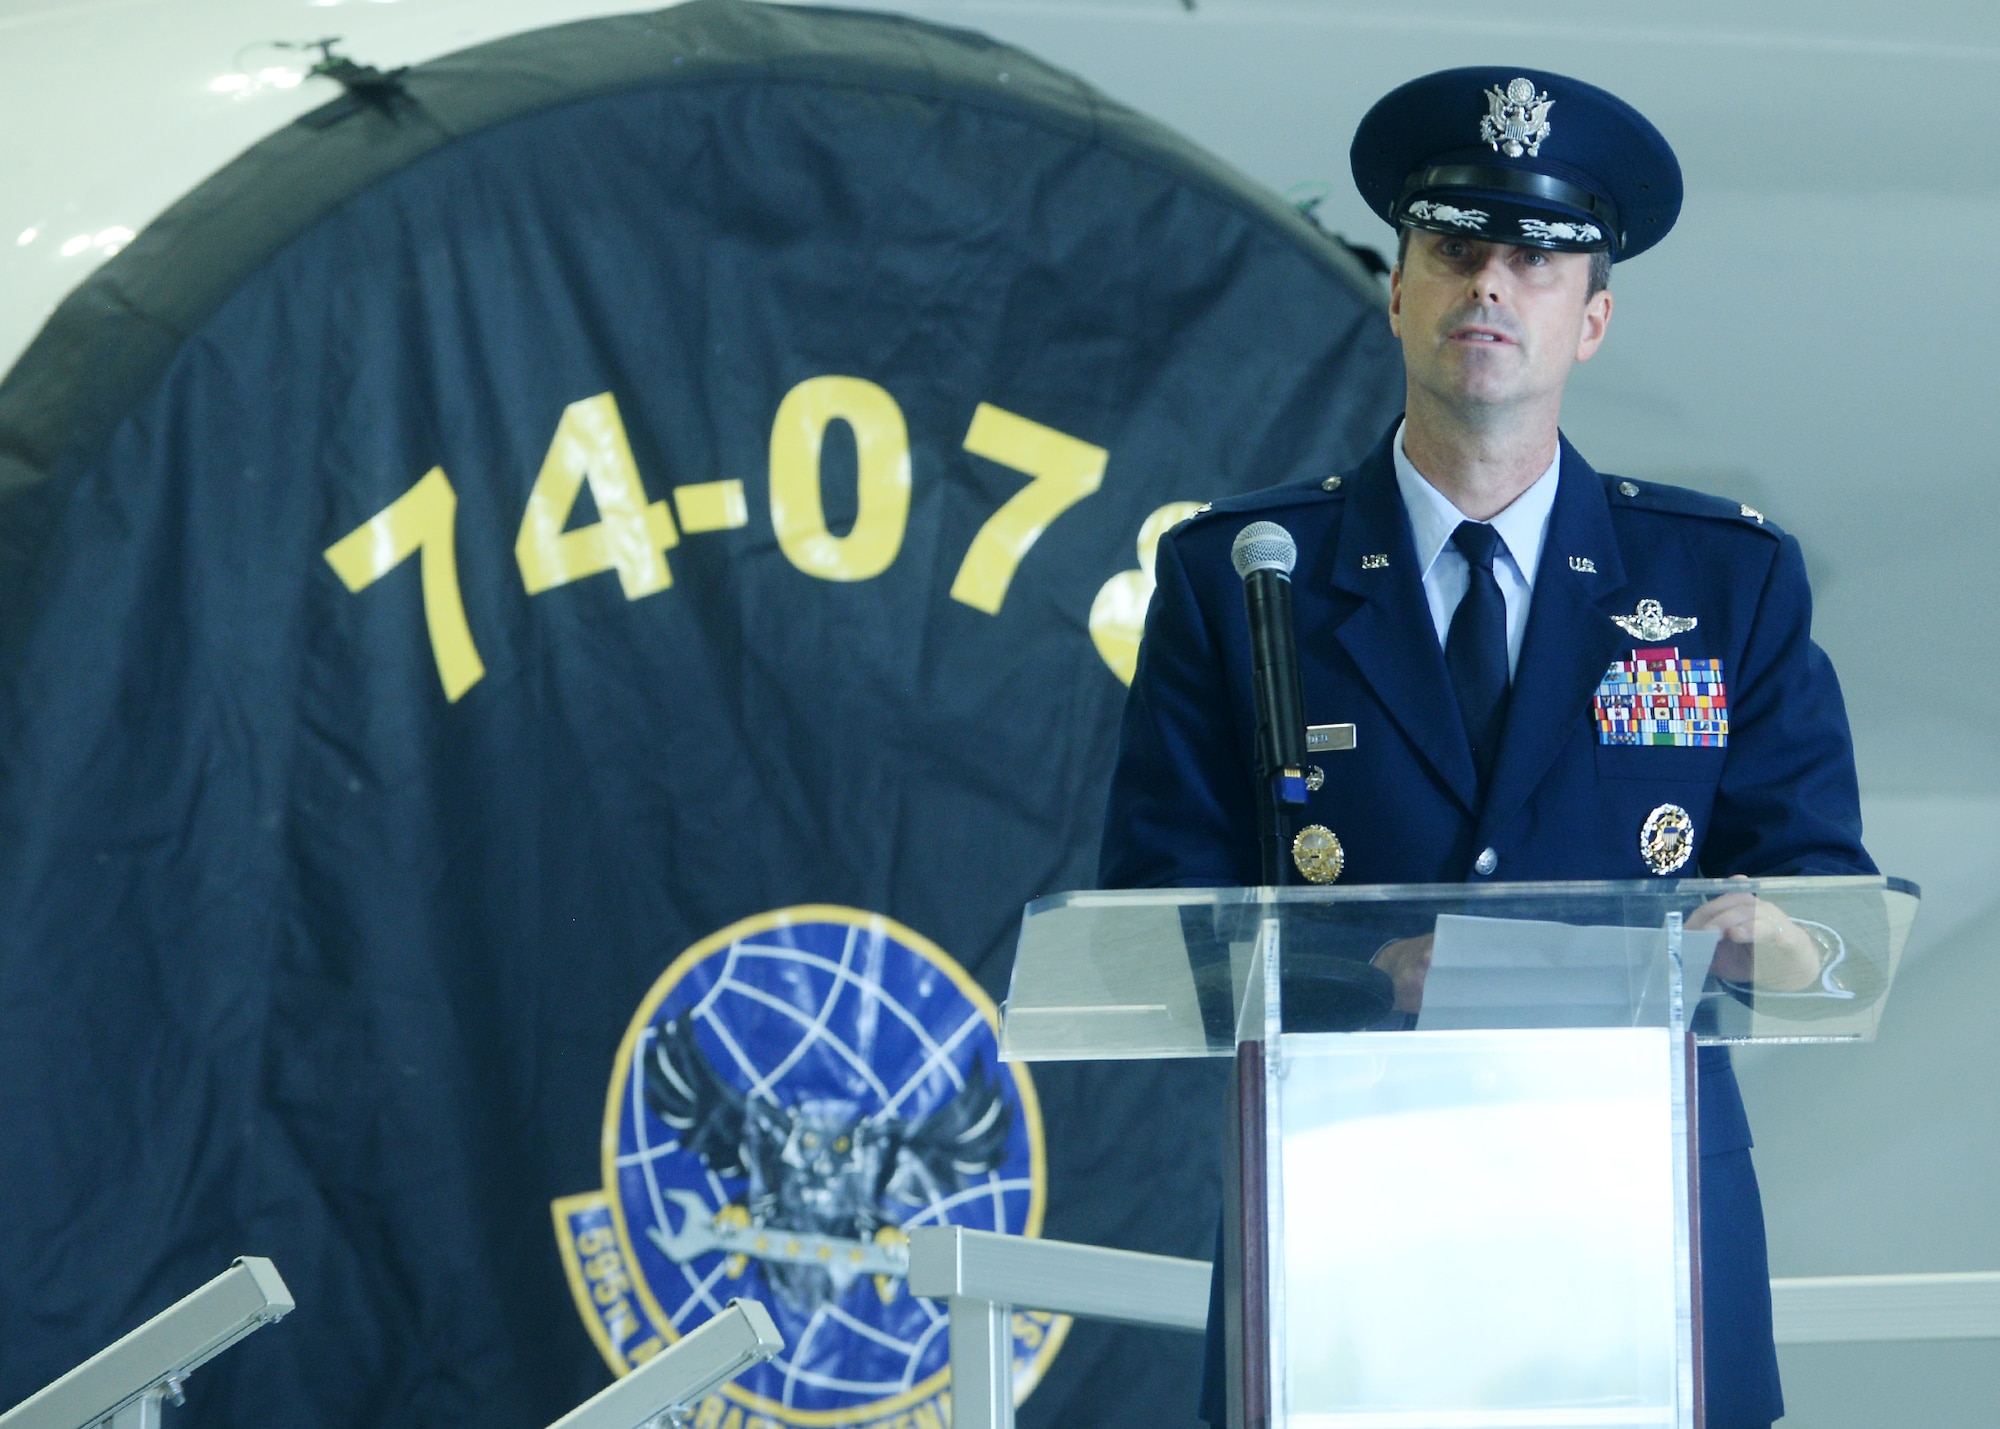 Airman stands at podium in front of E-4B aircraft